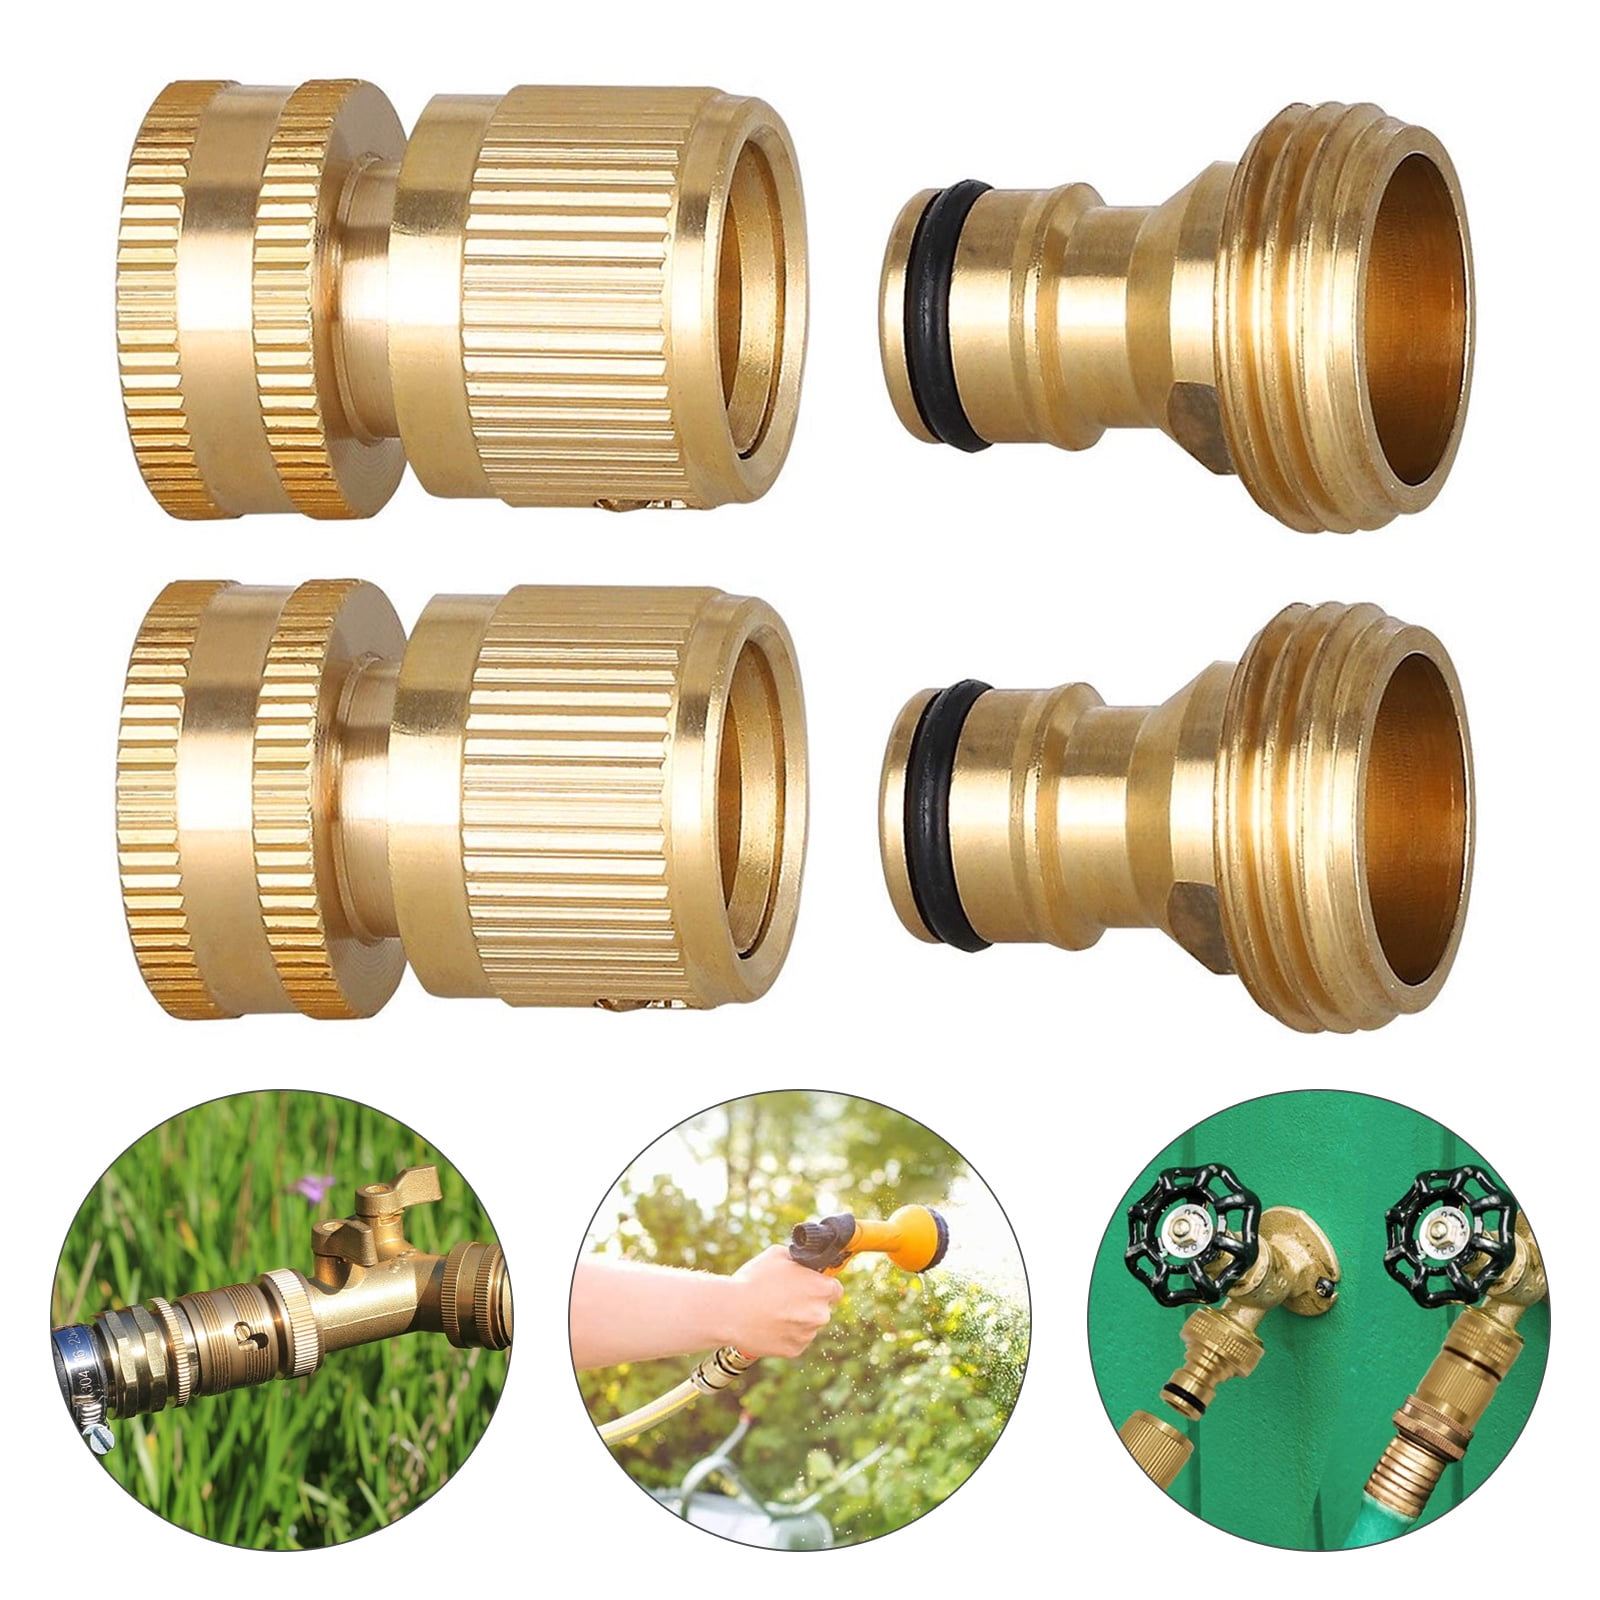 1/2" Quick Release Garden Hose Female Pipe Adapter With Stop Lock Fitting 2 Pack 